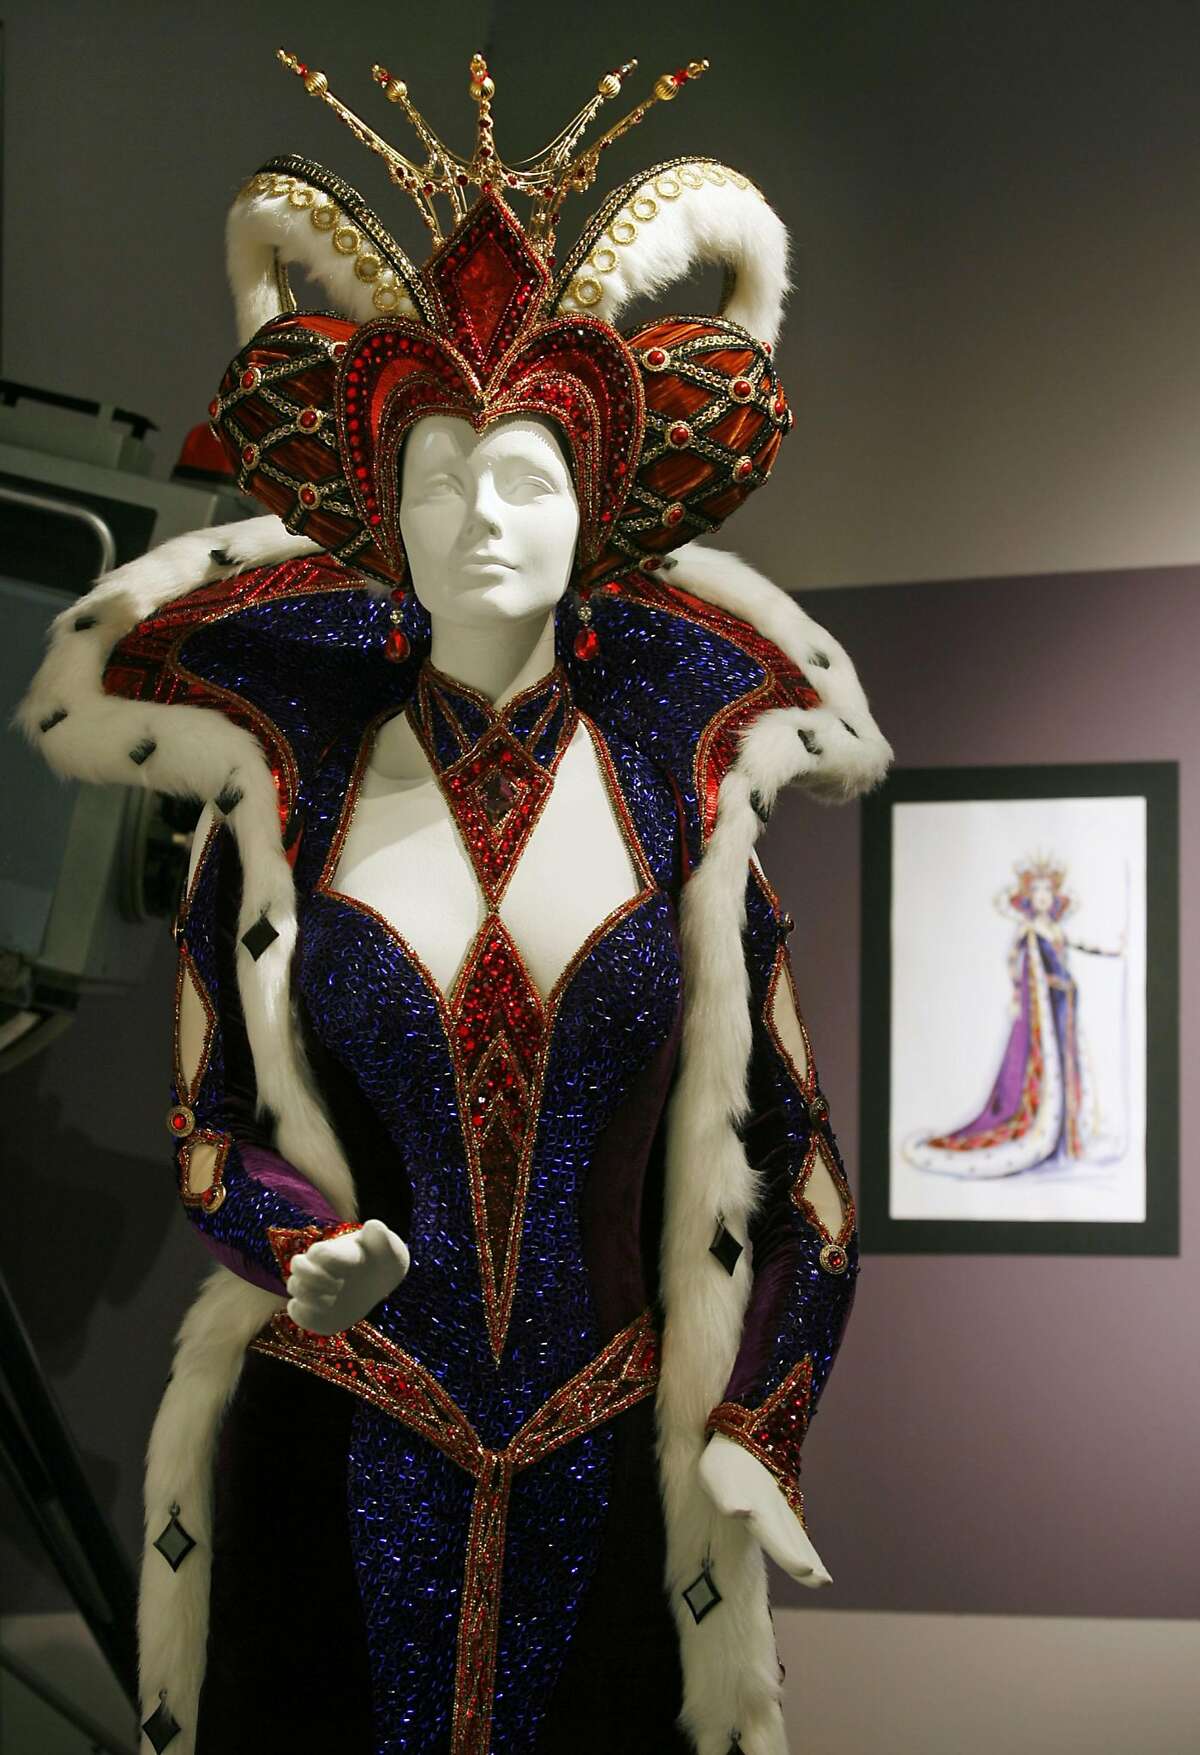 Carol Burnett's costume, designed by Bob Mackie for the 2005 television special "Once Upon a Mattress," is on display at the Fashion Institute Of Design & Merchandising in Los Angeles, Wednesday, Aug. 2, 2006. Mackie was among those nominated for a costume design movie Emmy award for his work on the movie. Winning duds in the series costumes category as well as its movie and mini-series counterpart will be announced Aug. 19, when the creative arts Emmys are presented at the Shrine Auditorium in Los Angeles. (AP Photo/Damian Dovarganes) Ran on: 08-14-2006 Carol Burnetts costume, designed by Bob Mackie for the 2005 TV special Once Upon a Mattress, is on display in Los Angeles.